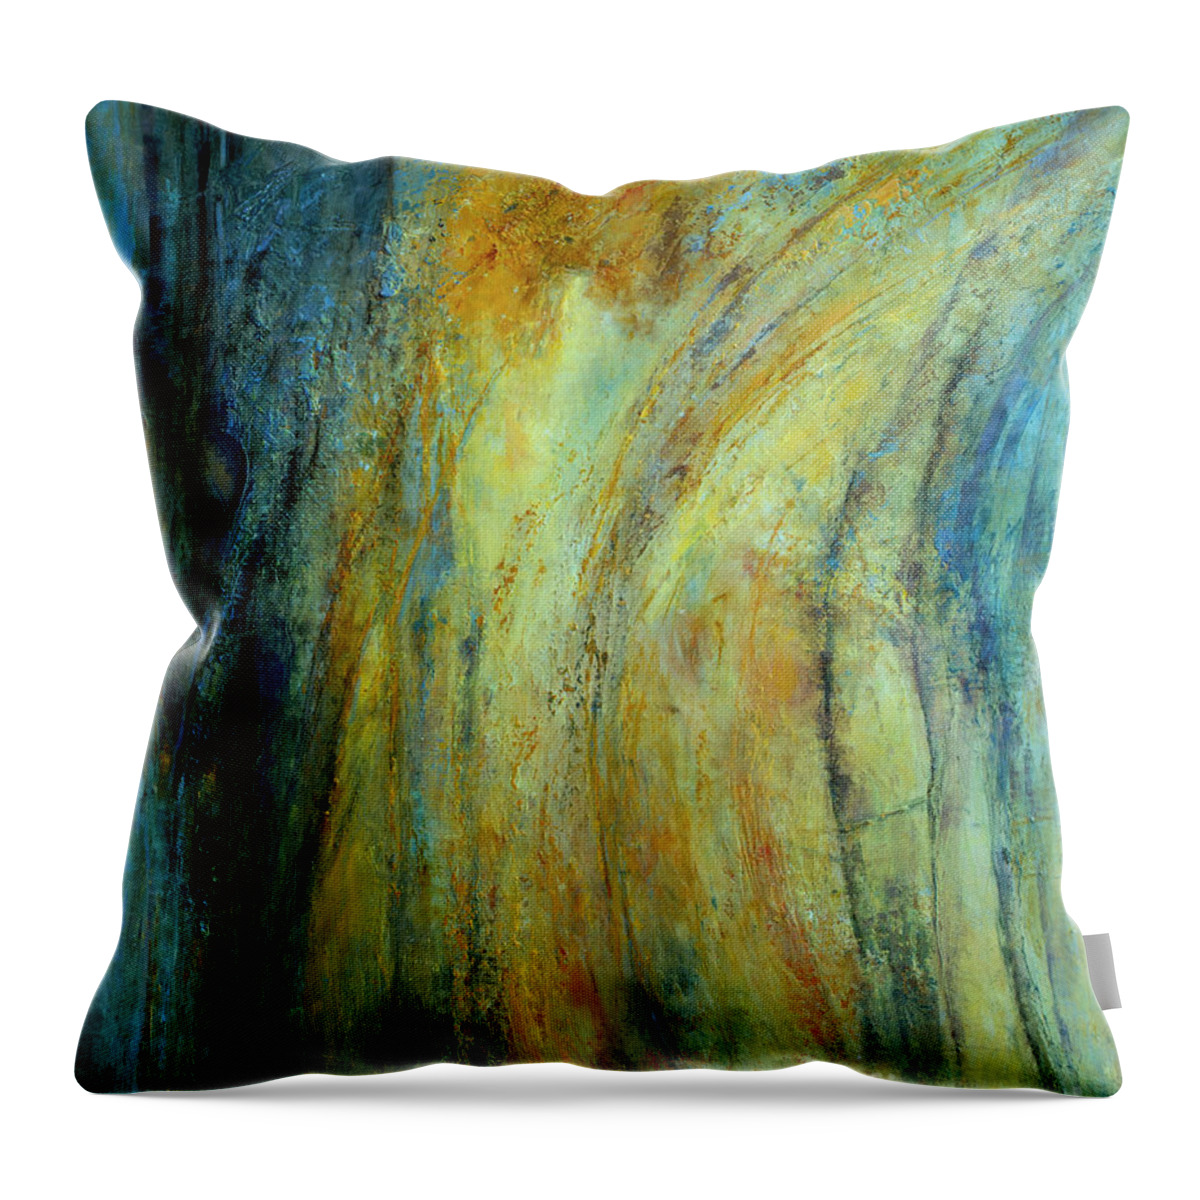 Abstract Throw Pillow featuring the painting Balancing Act by Valerie Travers